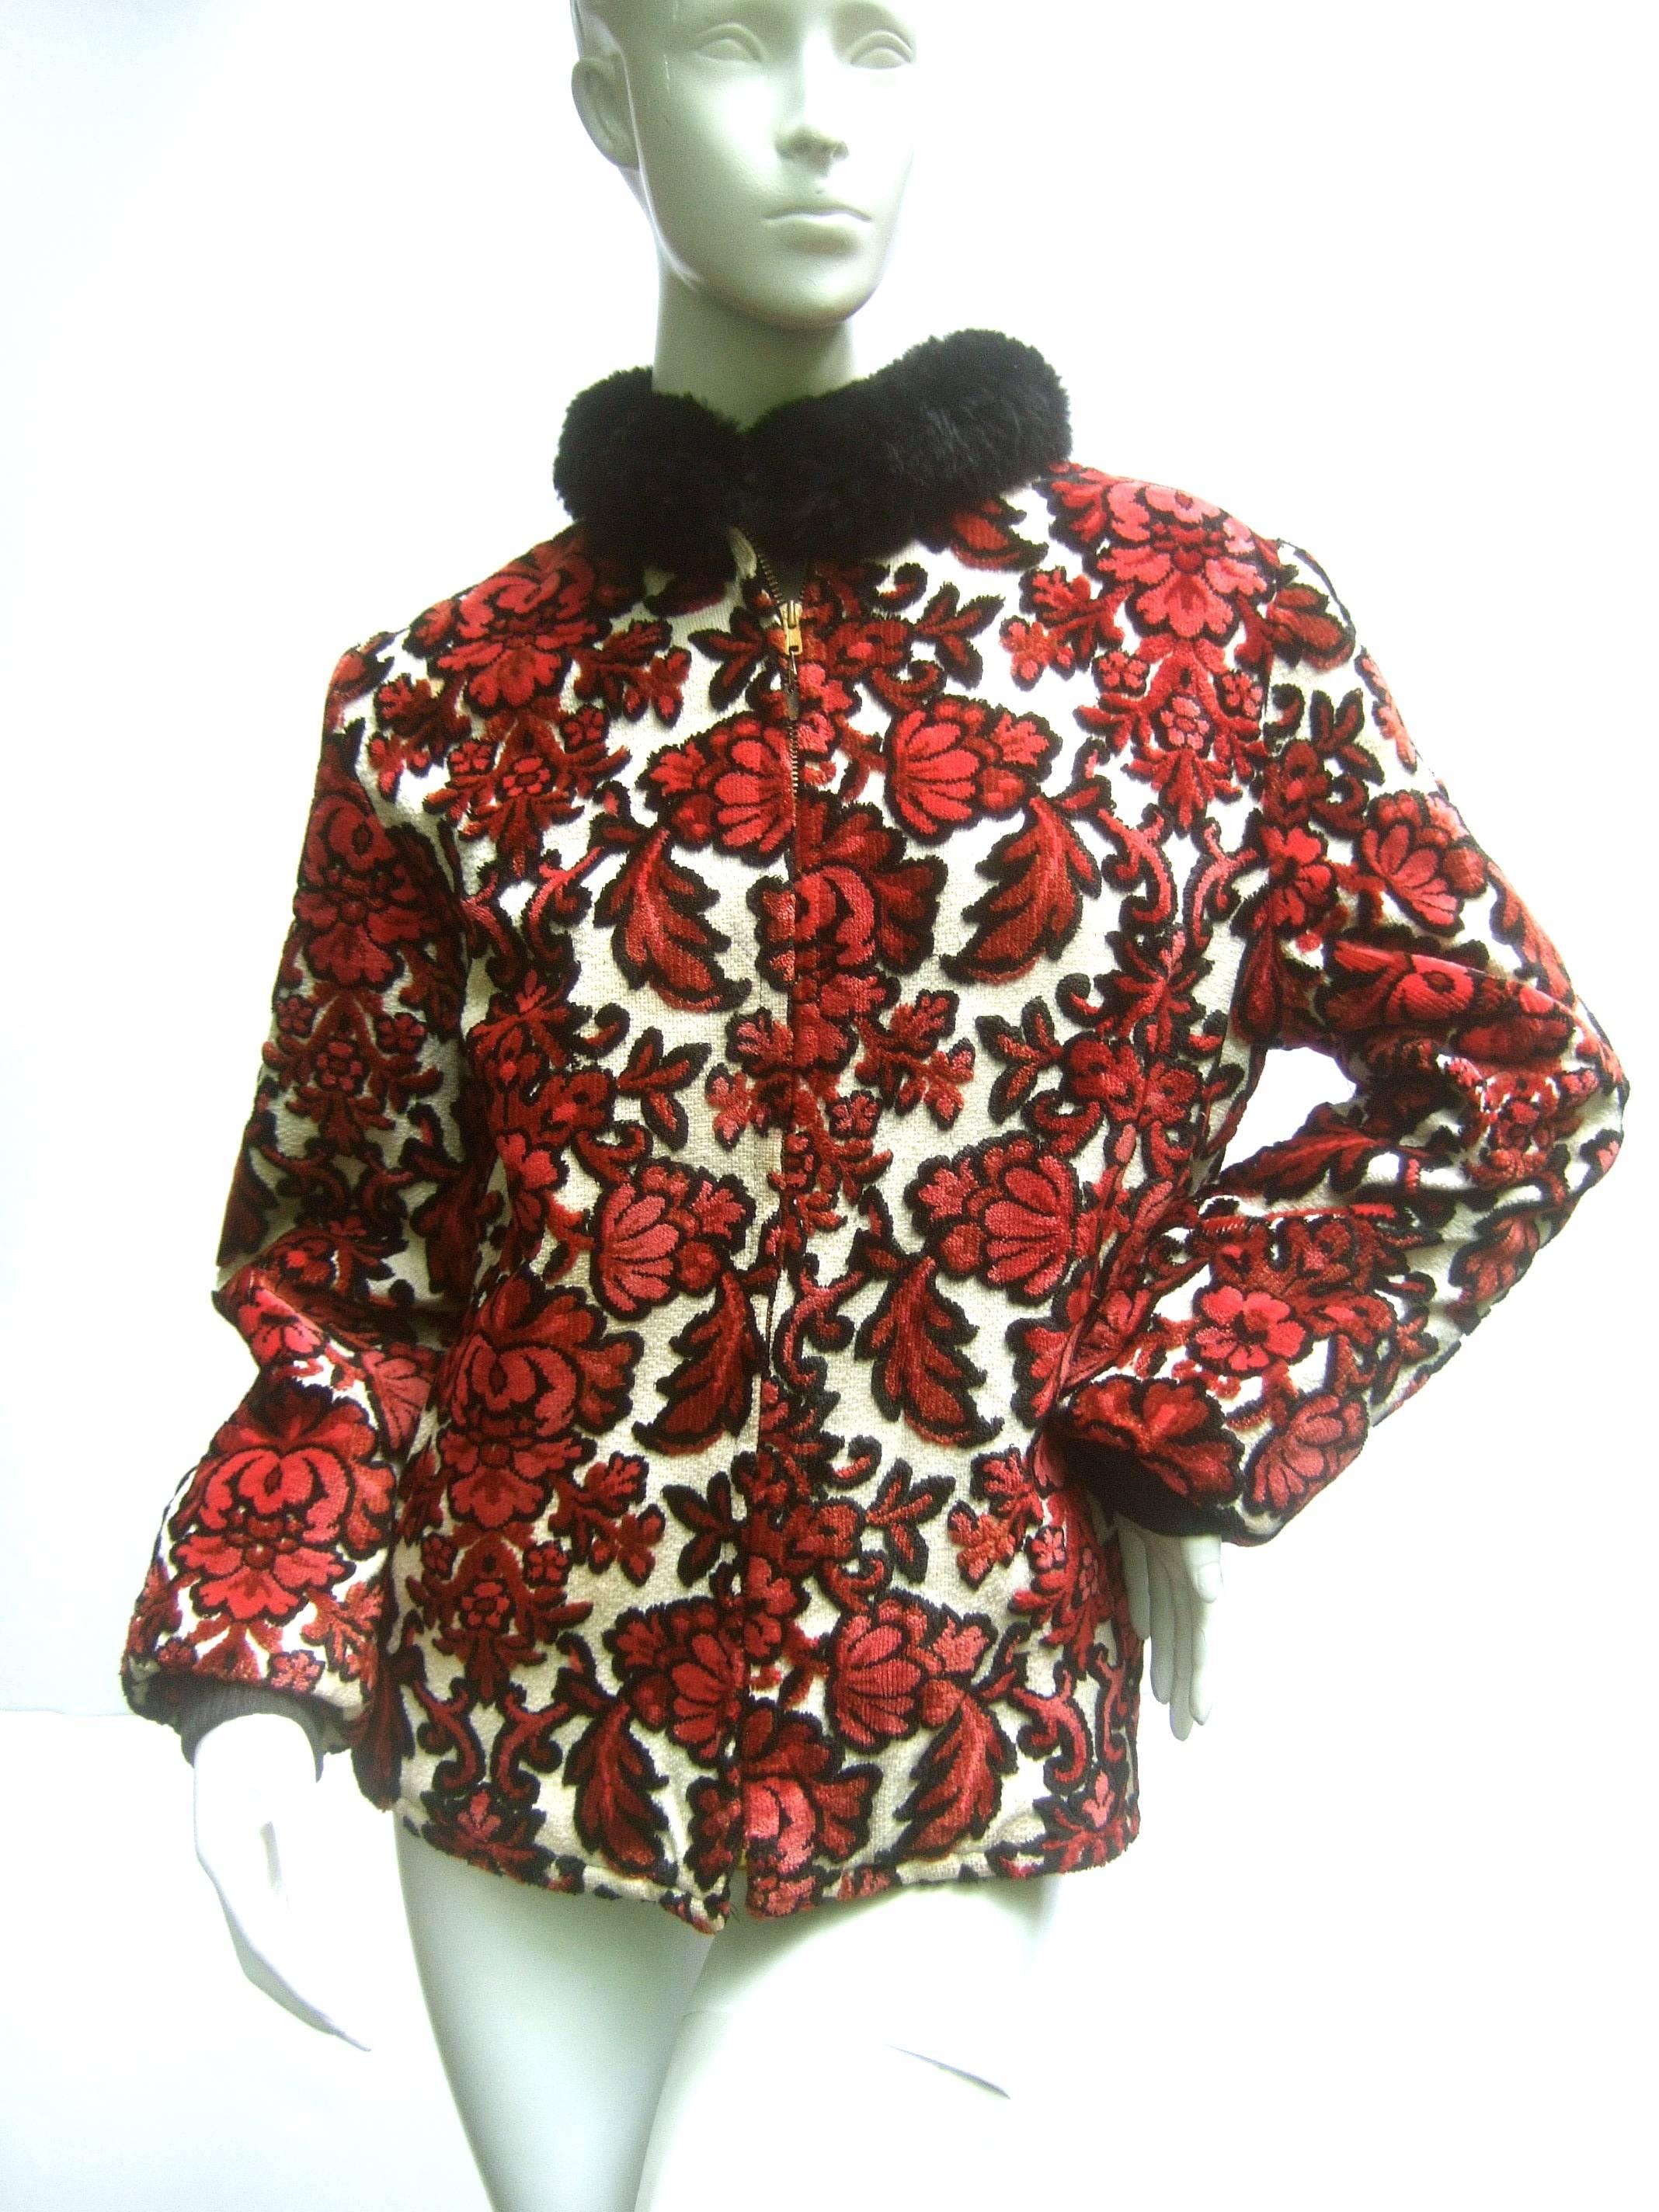 1960s Brocade cut velvet zippered jacket 
The unique retro jacket is a vibrant series
of bold deep red flowers set against 
an ivory background 

The jacket is accented with a plush faux
fur black collar. Zippers down the front
Lined in black